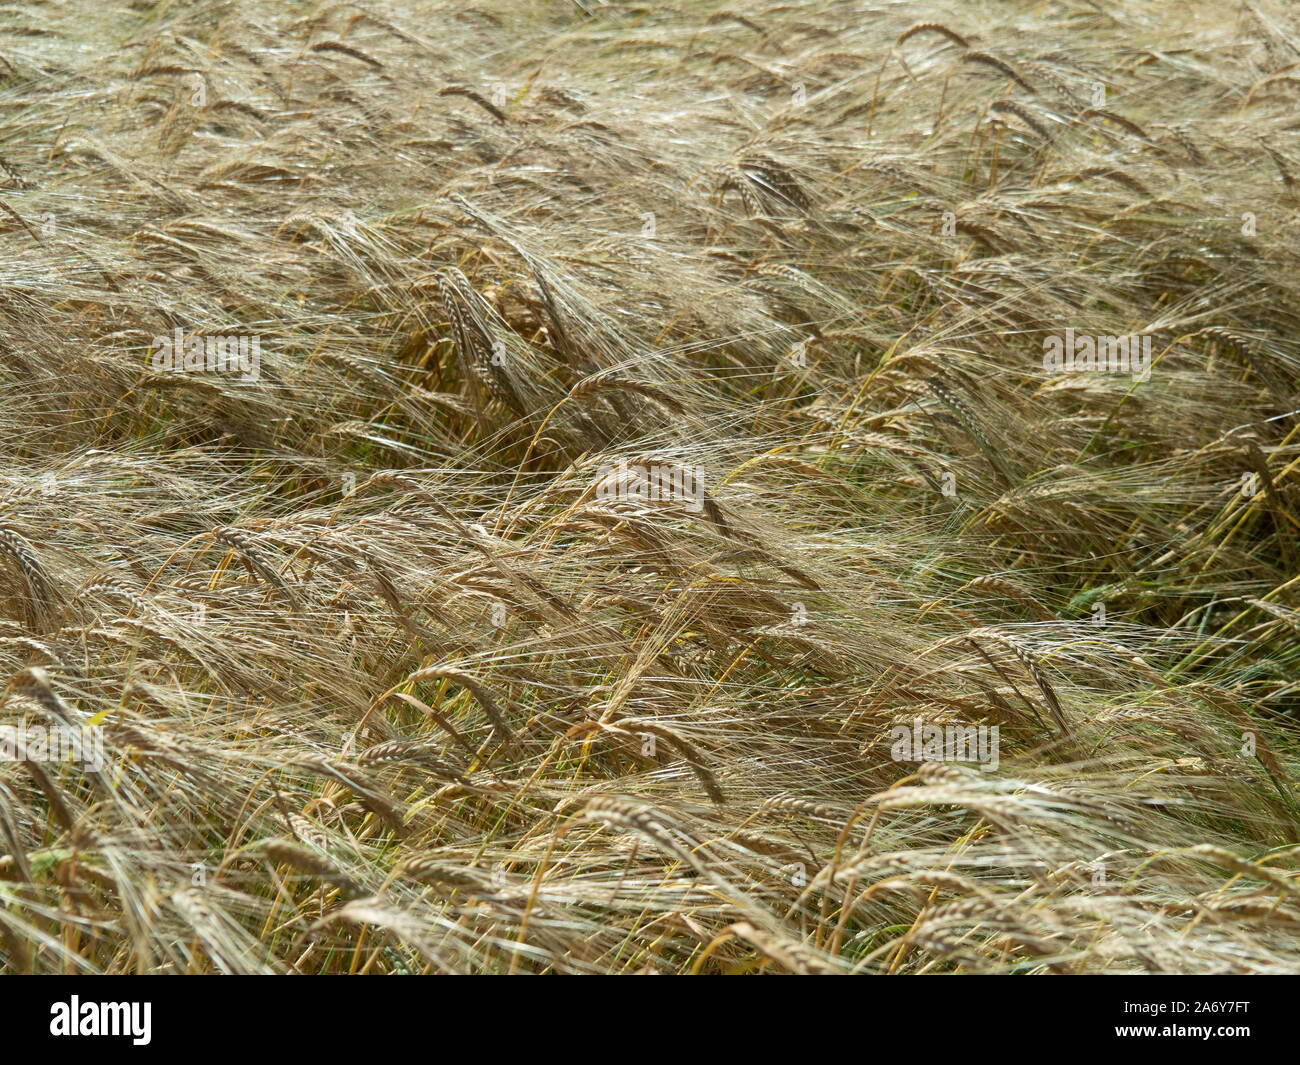 A low view across the ripe ears of a barley field Stock Photo